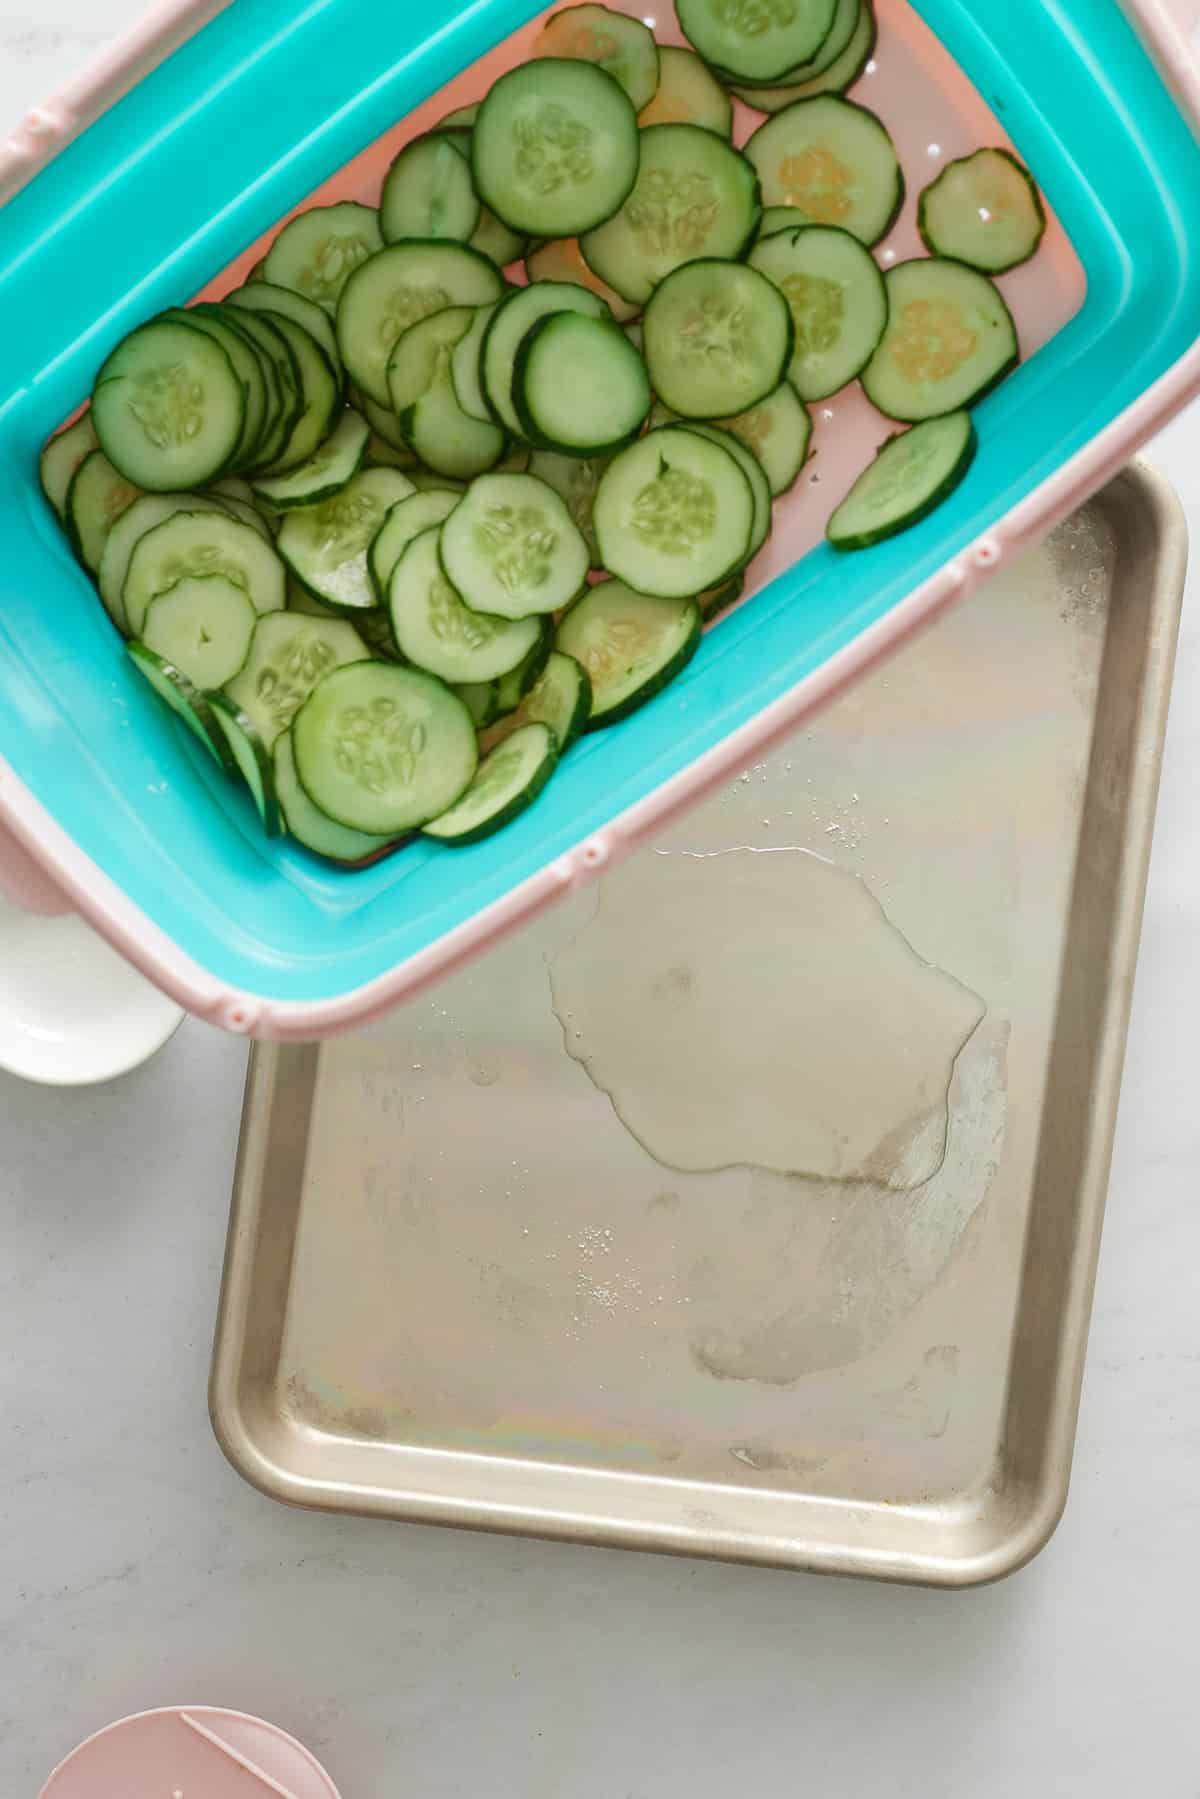 Draining the water from the cucumber slices.